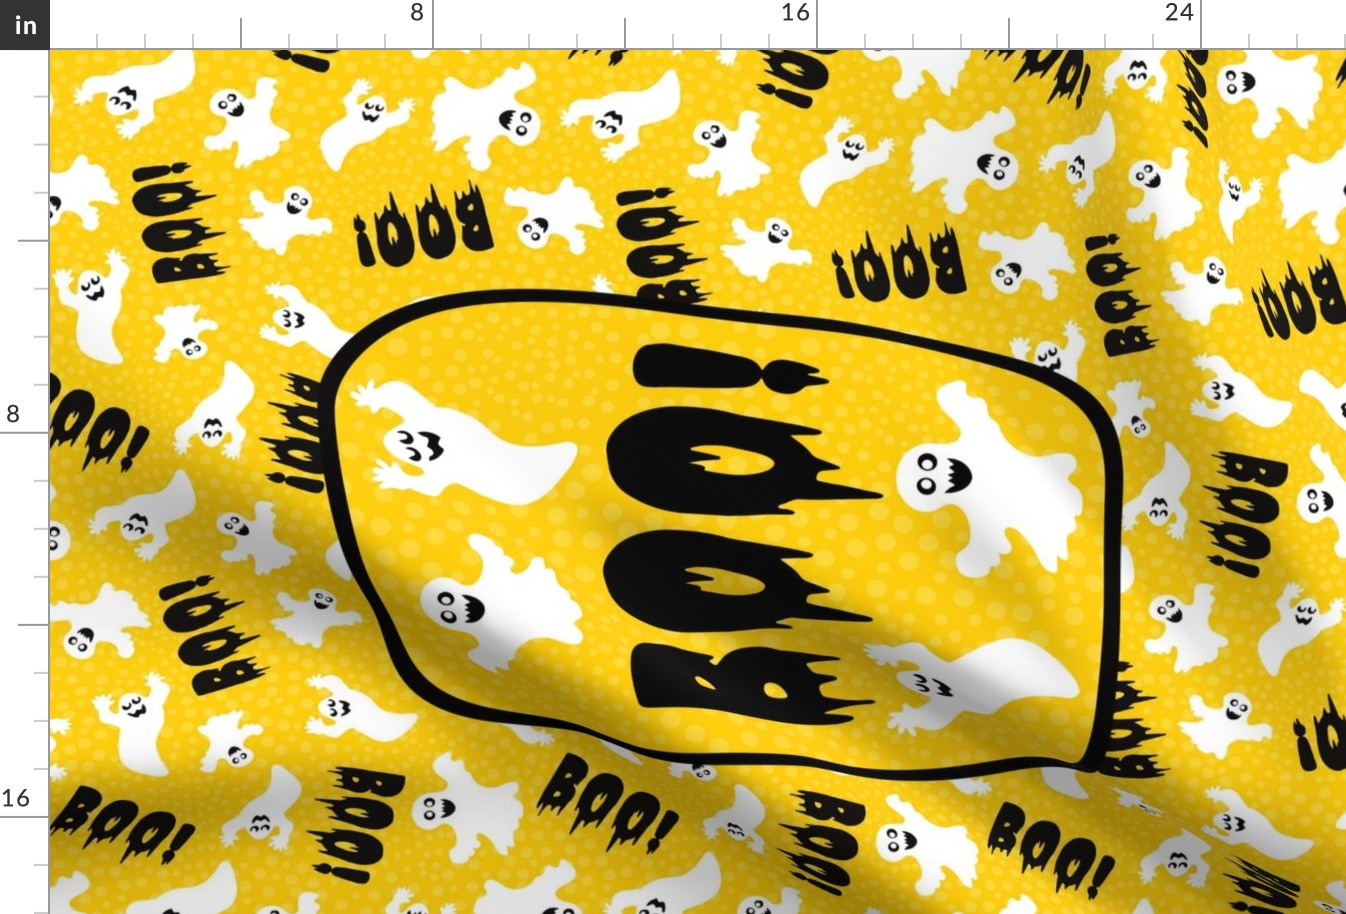 Large 27x18 Fat Quarter Panel Boo! White Creepy Halloween Ghosts for Tea Towel or Wall Hanging on Golden Yellow